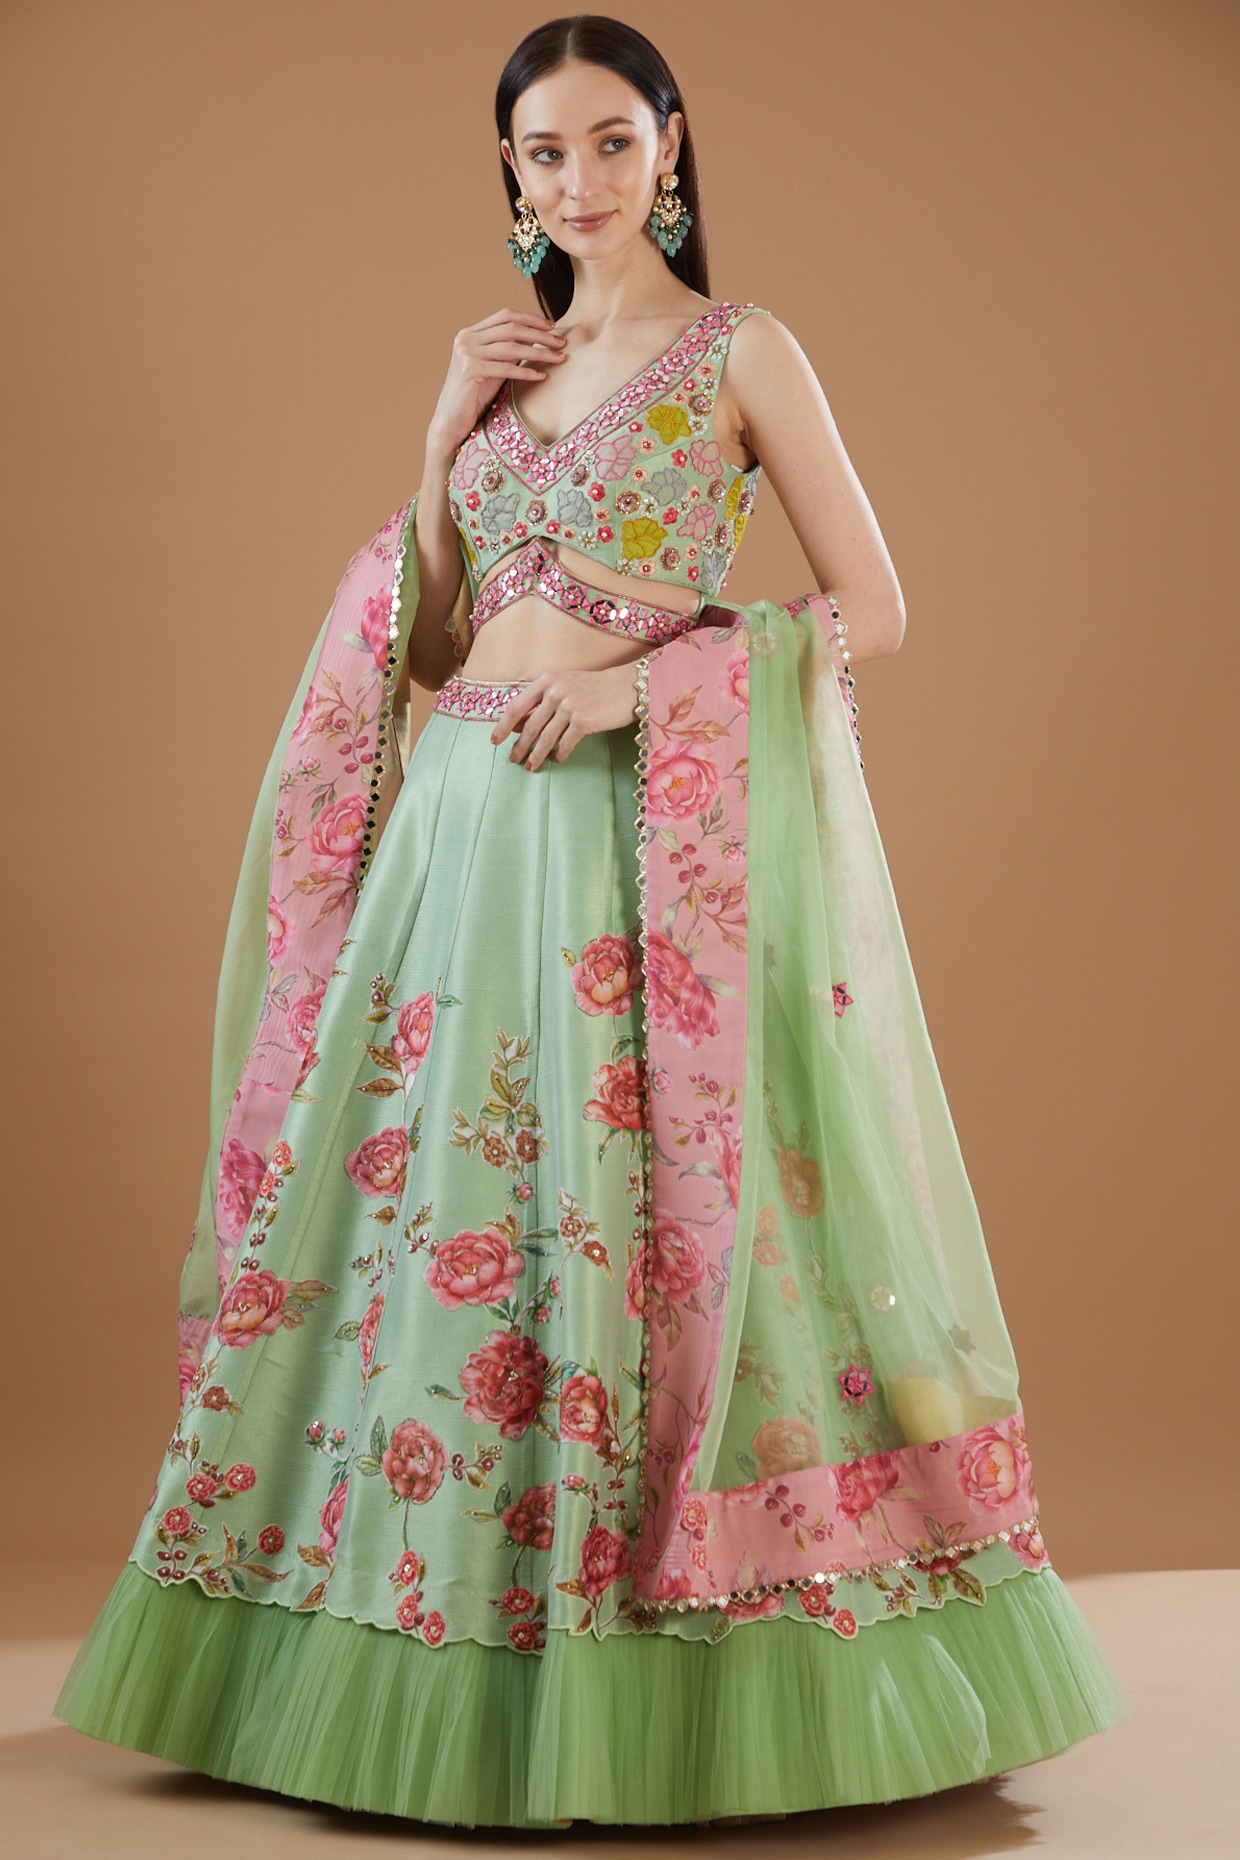 Neon Pink and Green light Lehenga – House of Hind